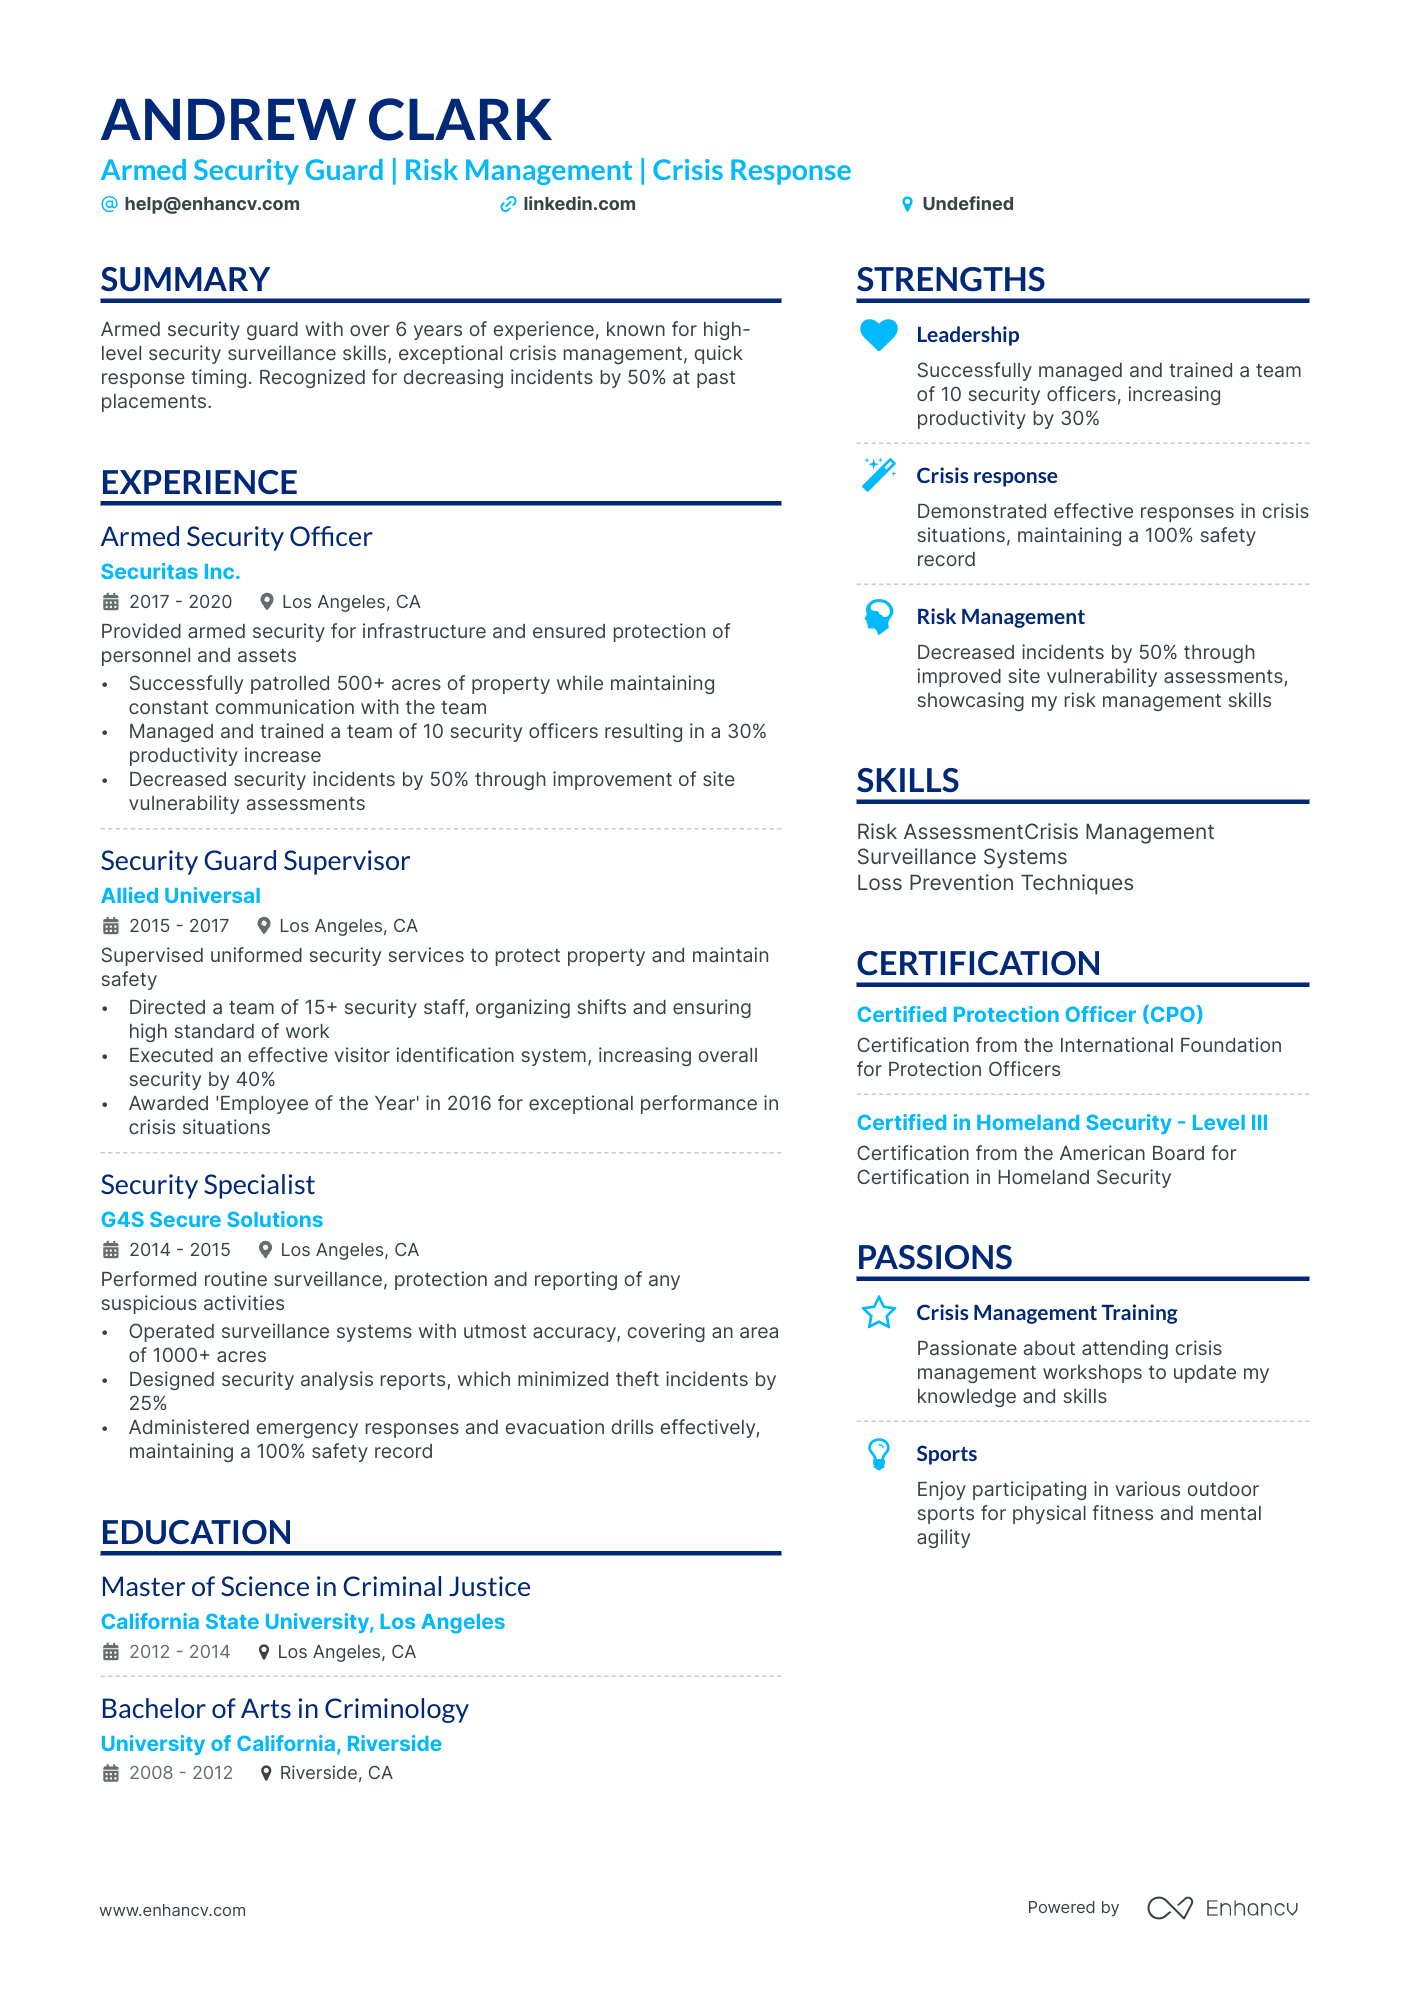 Armed Security Guard resume example